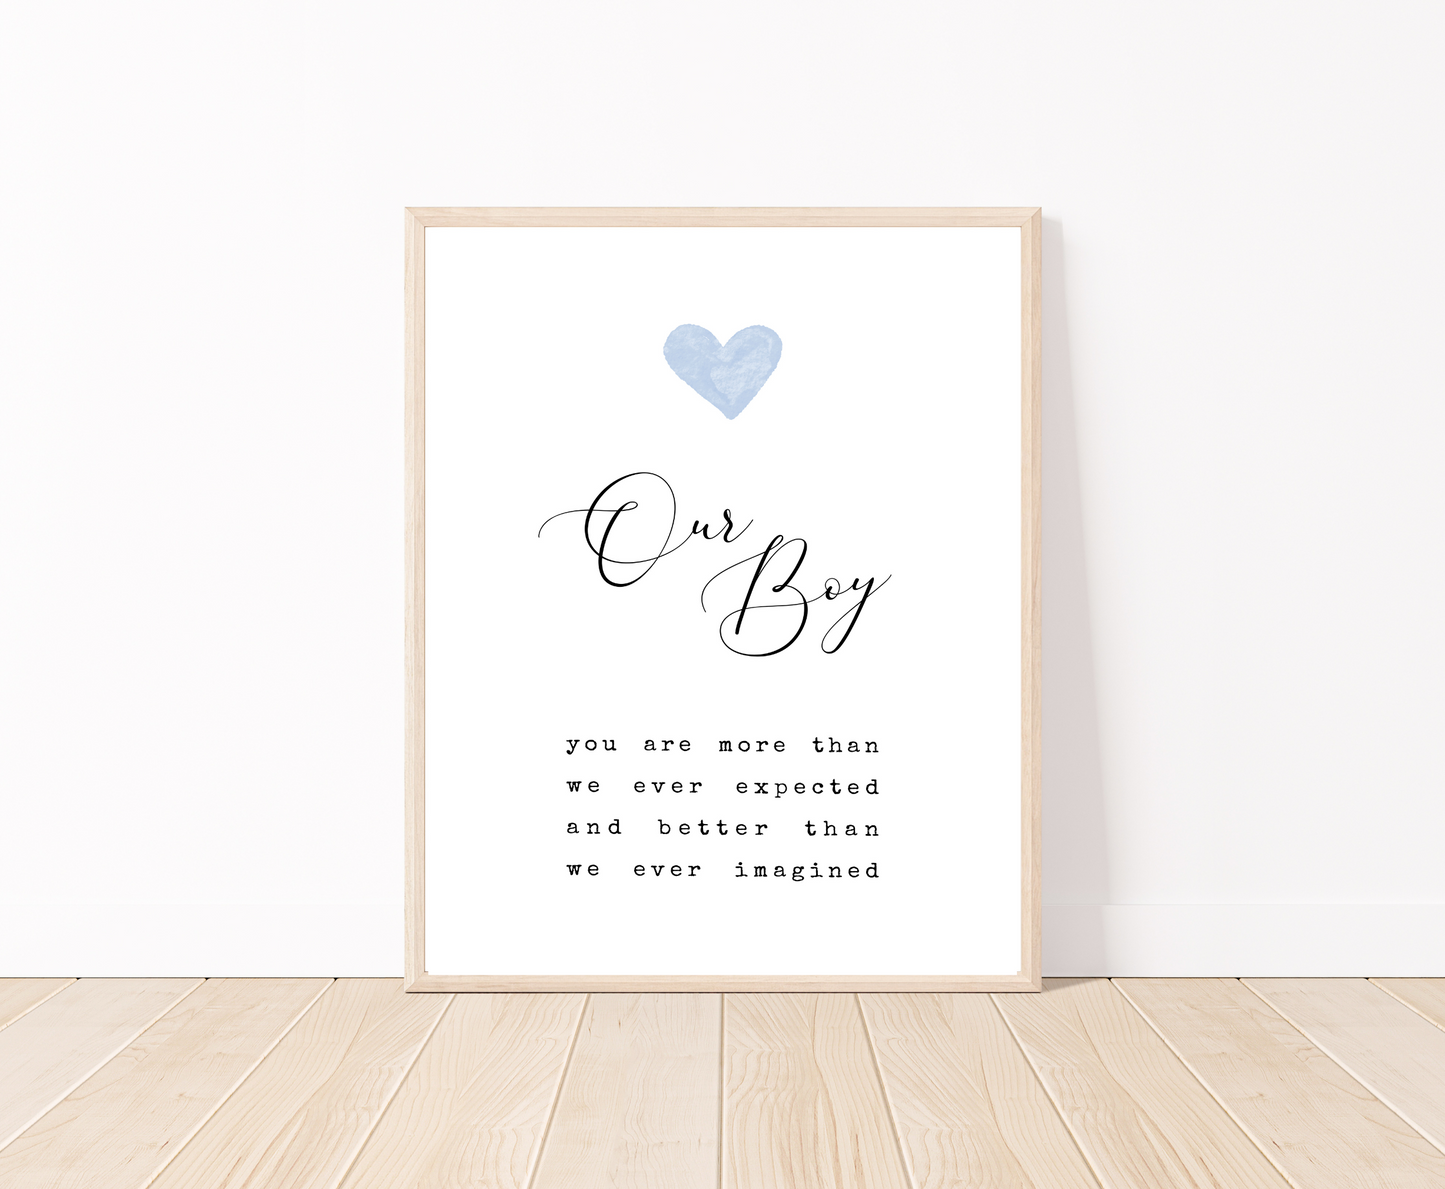 A frame showing a digital poster for a little boy’s room. It has a blue heart on top, with the words “Our Boy” written below, and a piece of writing that says: You are more than we ever expected, and better than we ever imagined.